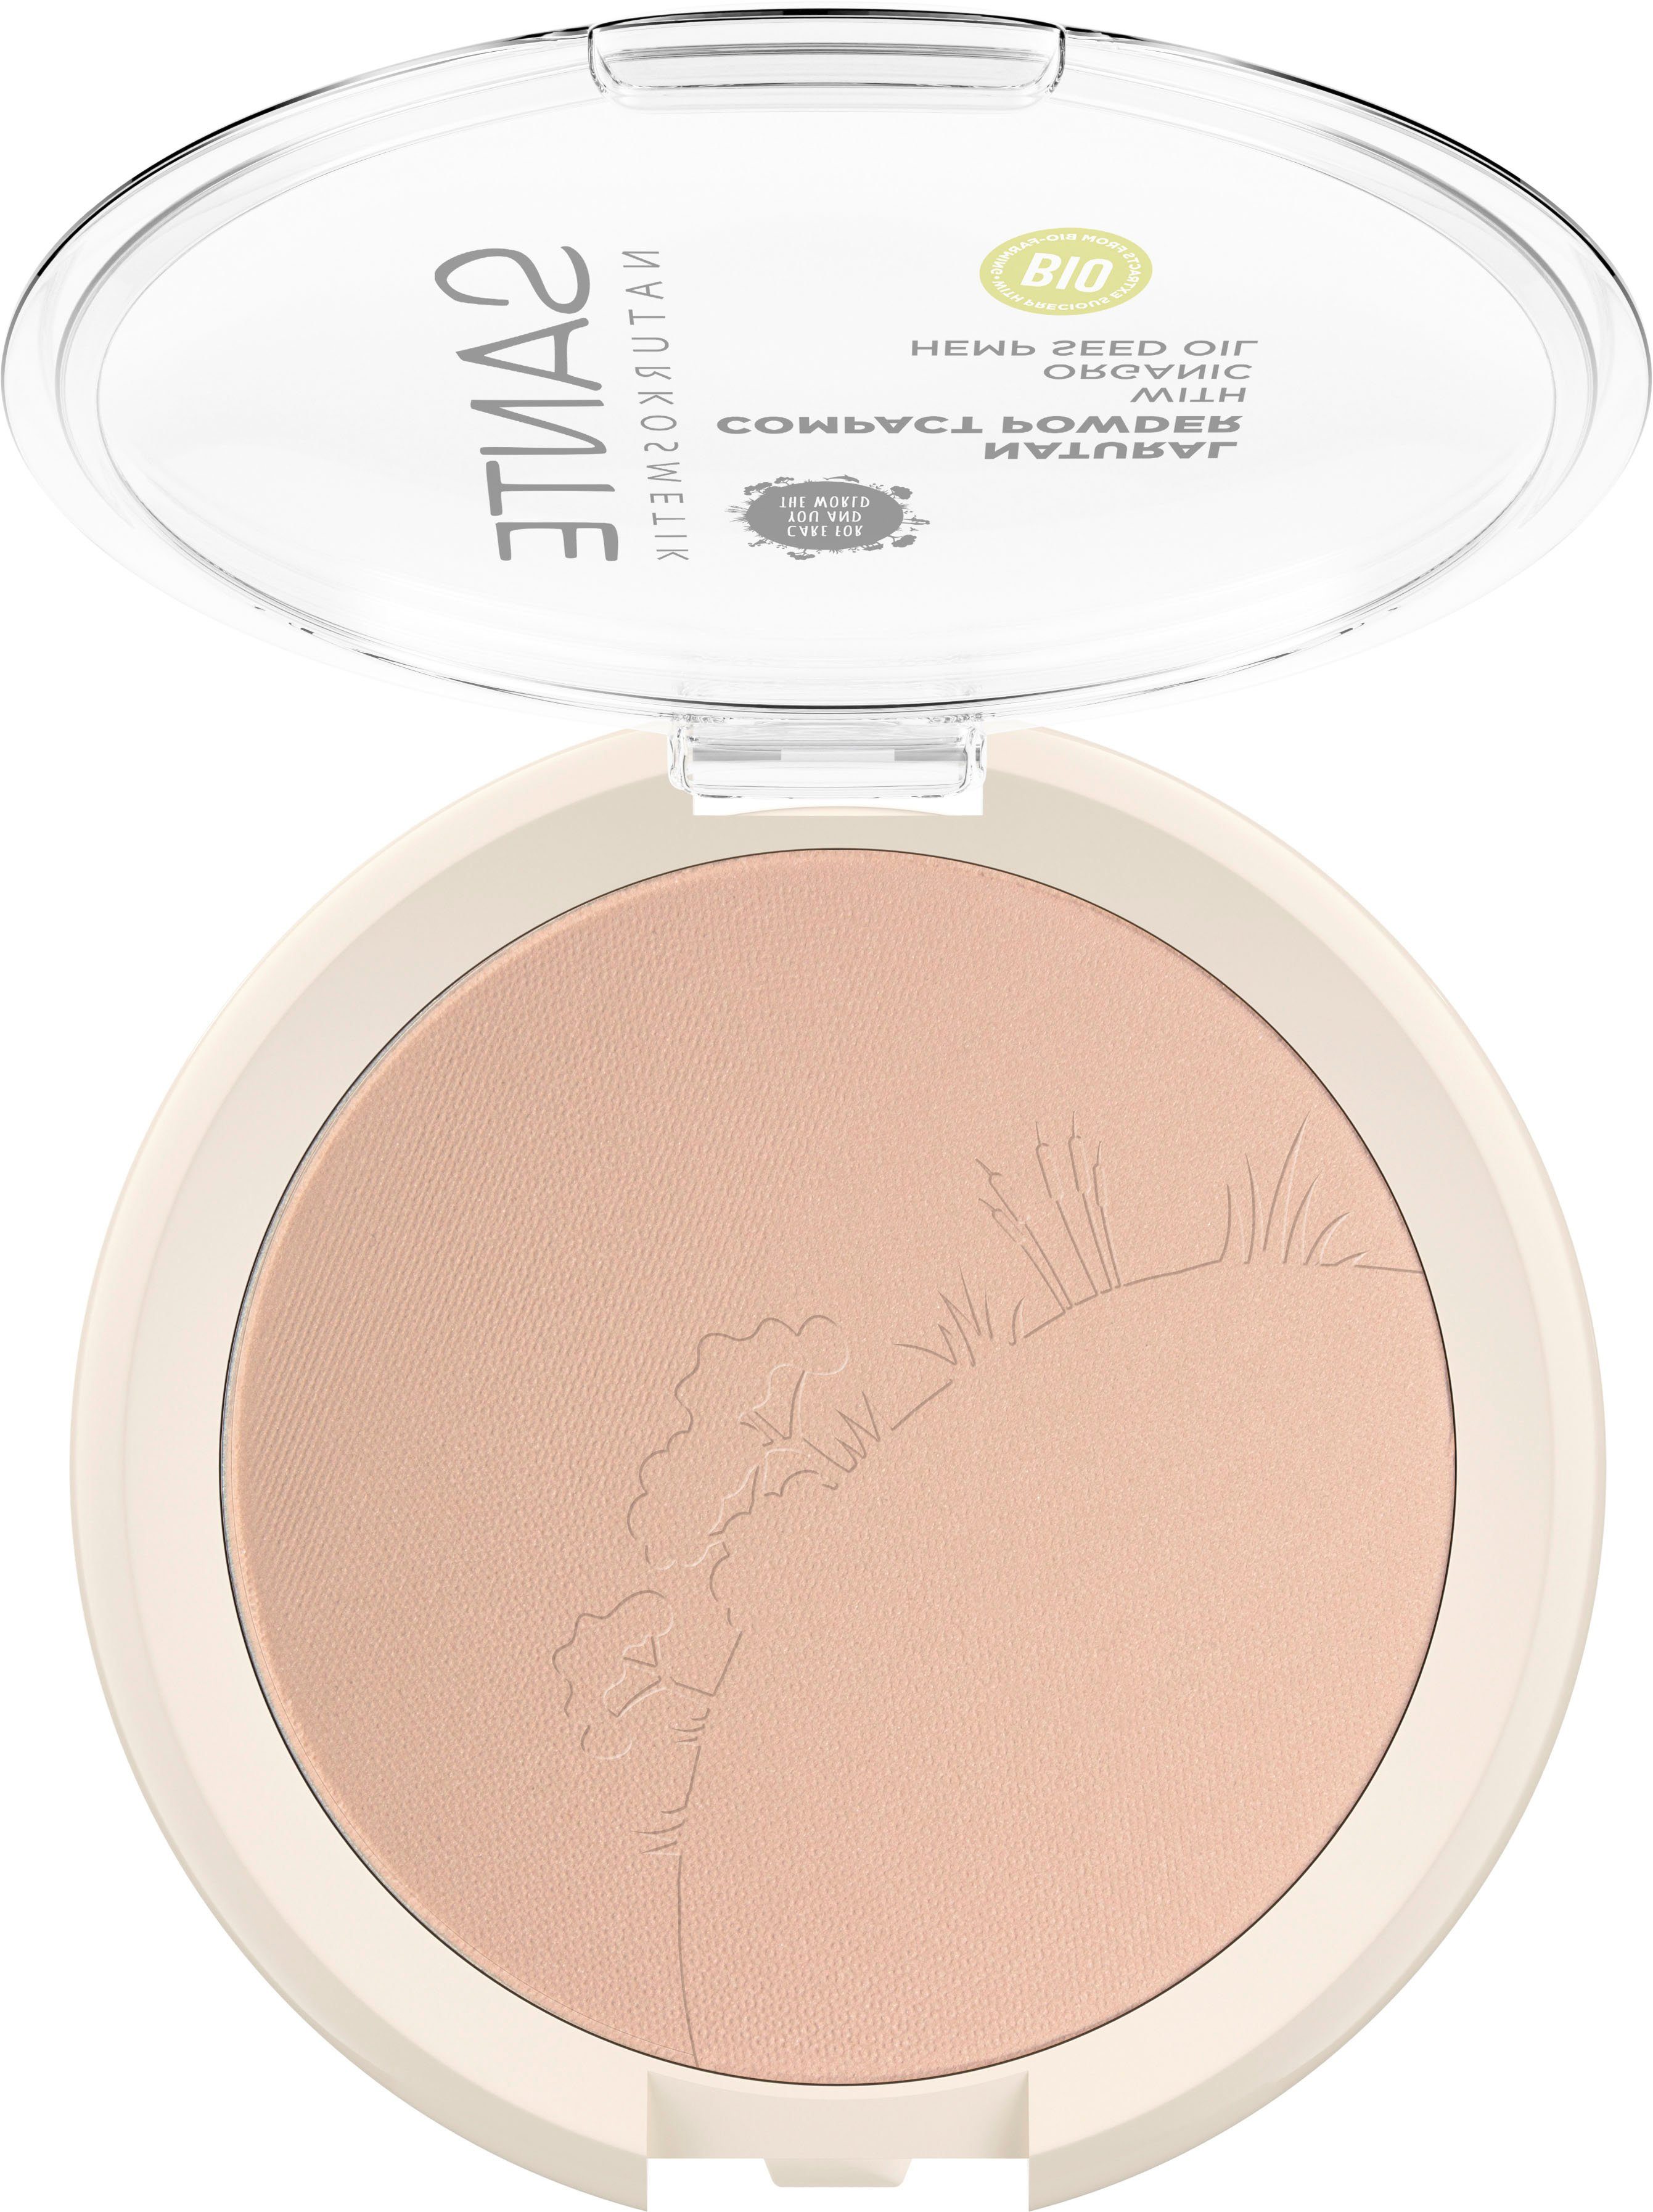 Puder Natural Cool Ivory Powder Compact 01 SANTE